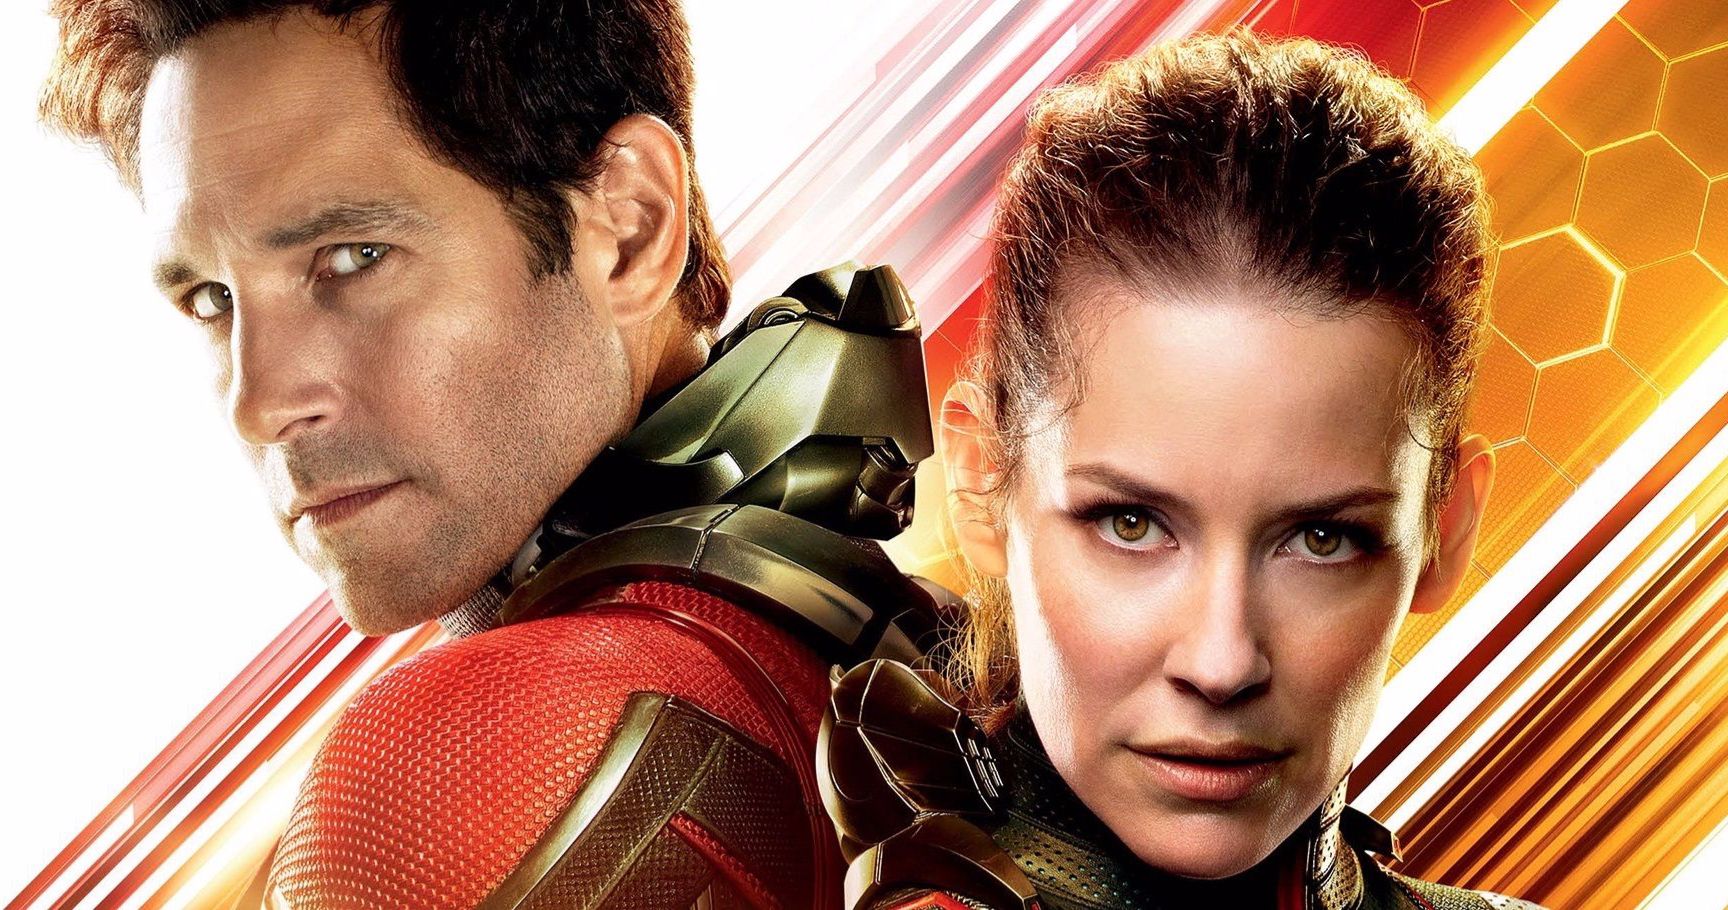 Netflix Loses Its Last MCU Movie as Ant-Man and the Wasp Heads to Disney+